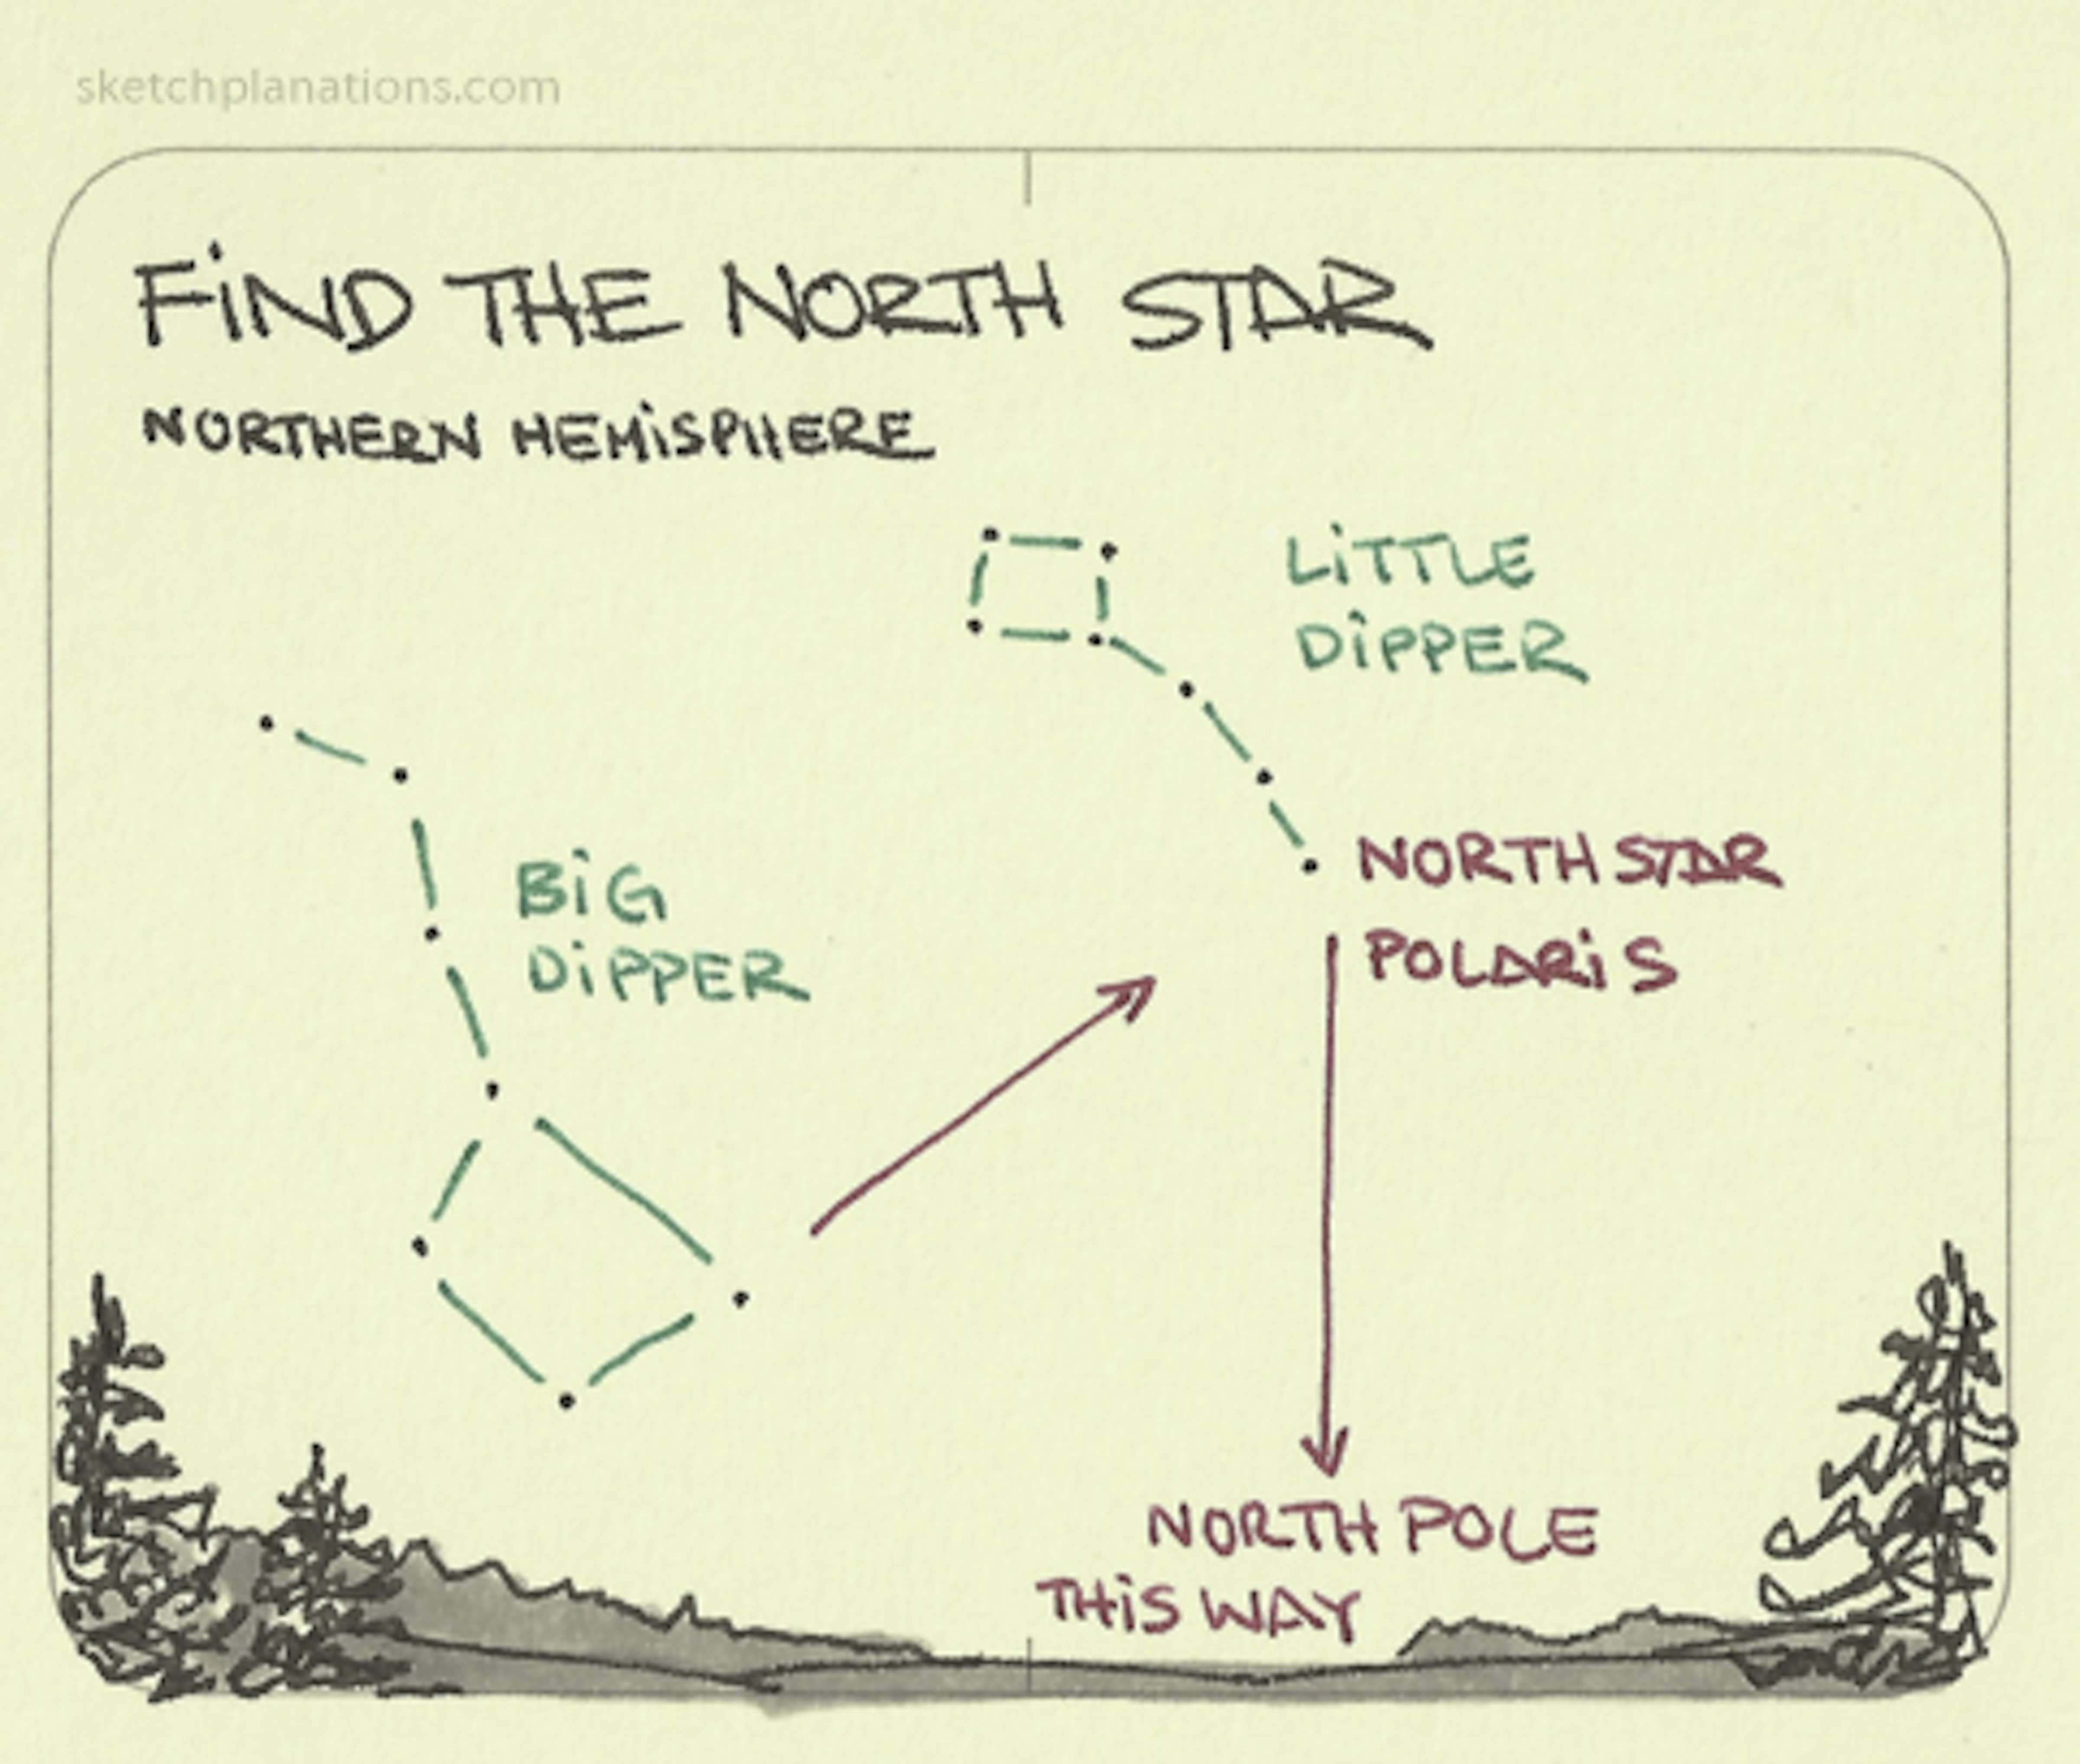 Find The North Star Sketchplanations